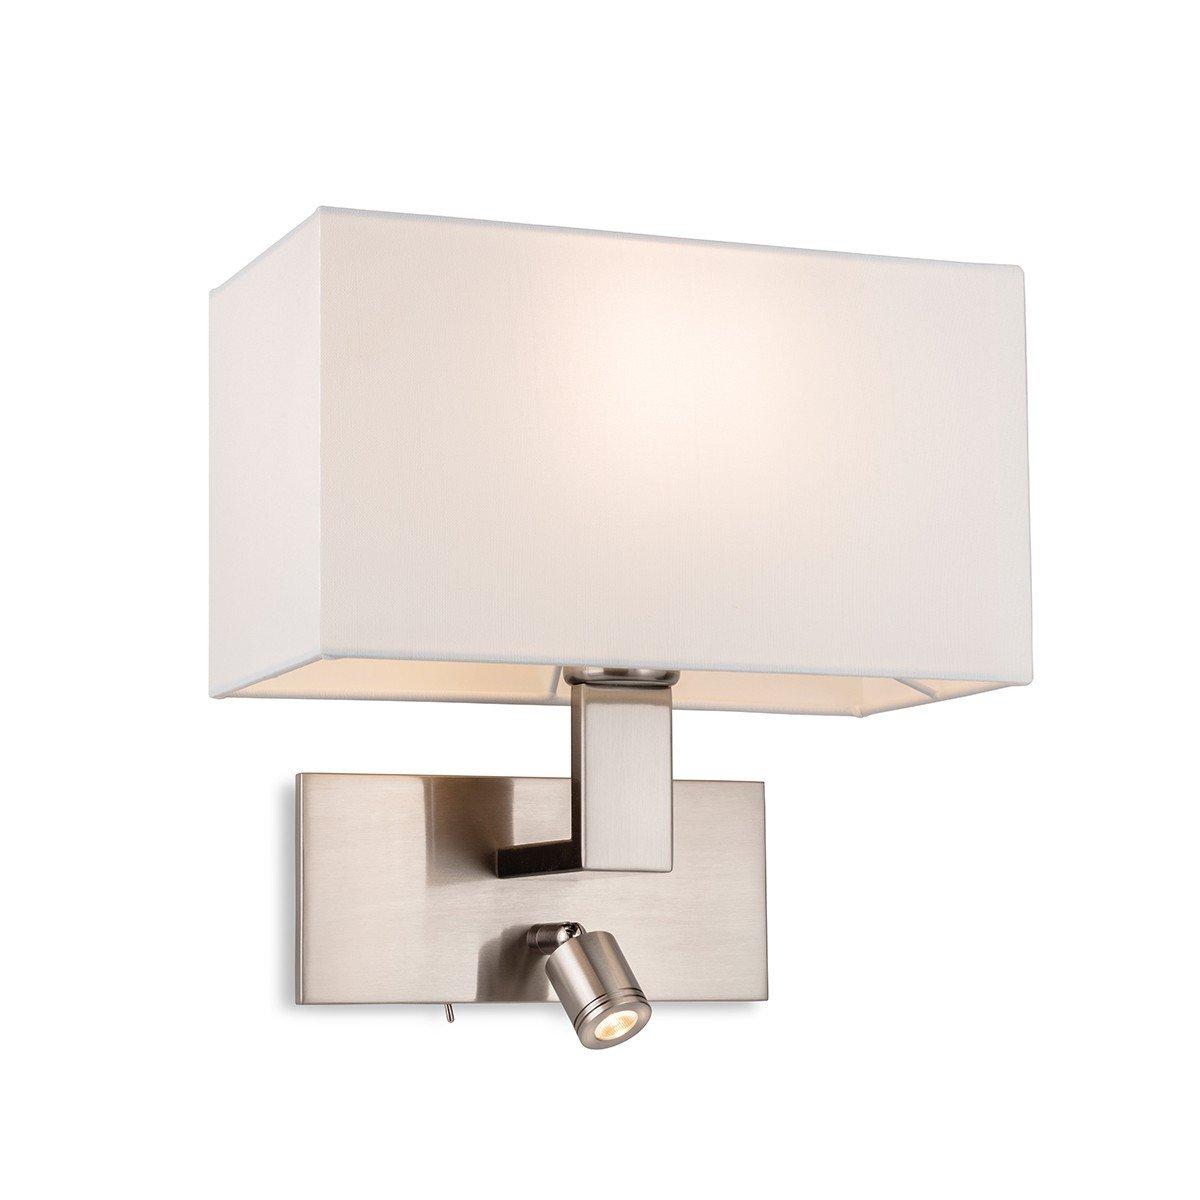 Raffles Wall Lamp with Adjustable Switched Reading Light Brushed Steel with Cream Shade